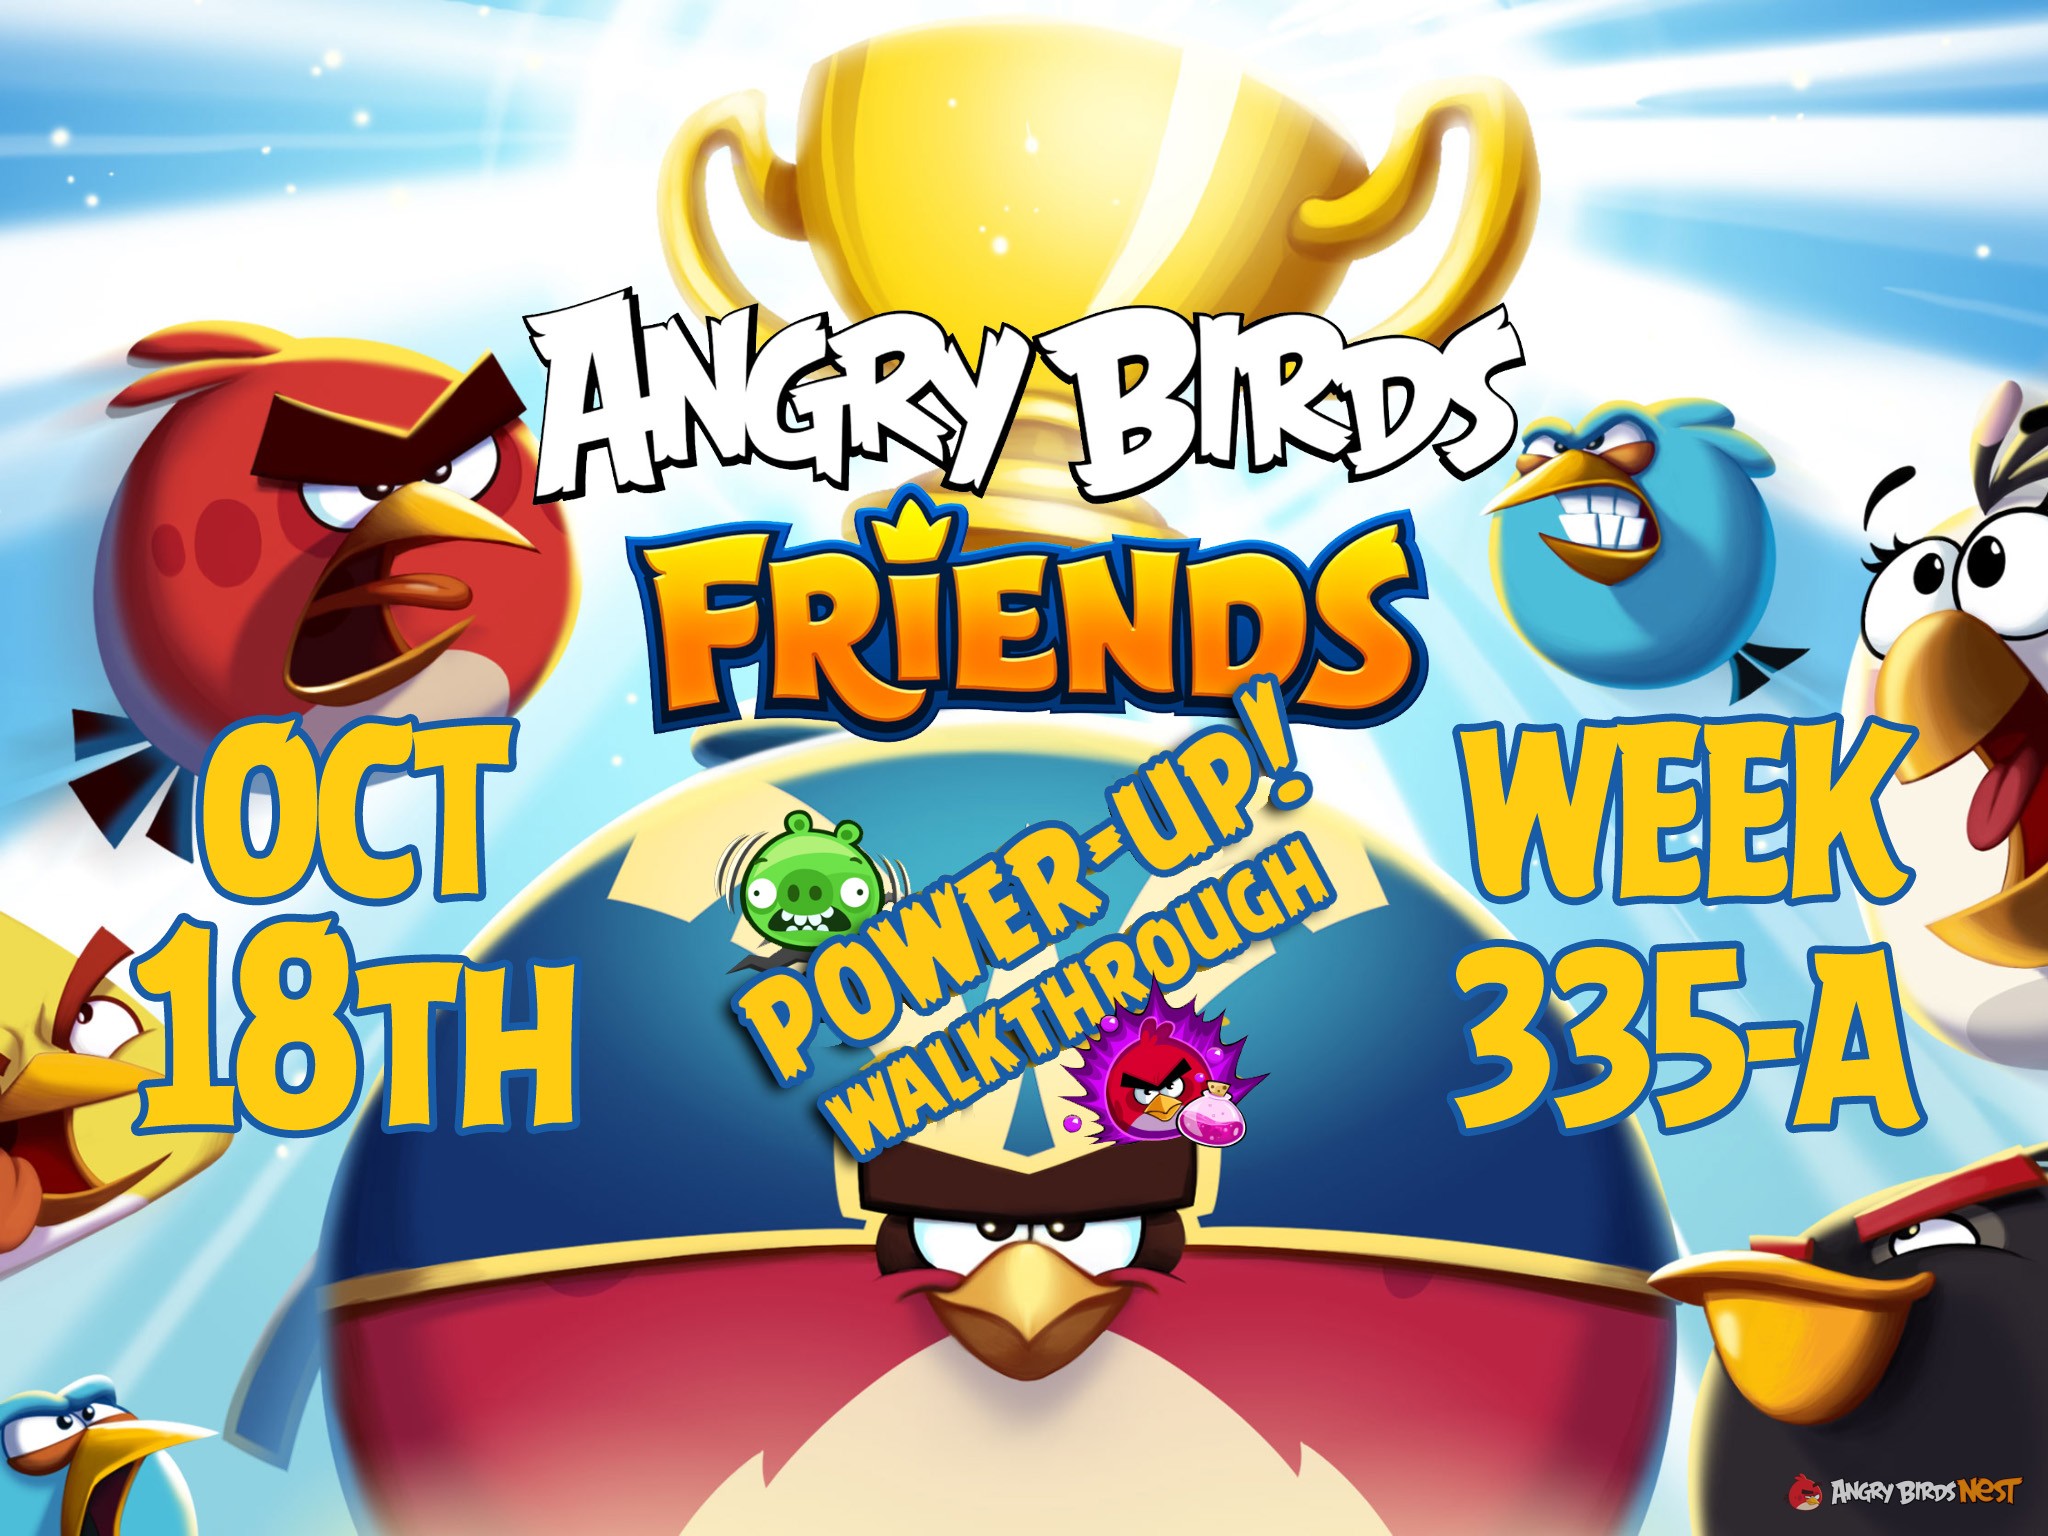 Angry-Birds-Friends-Tournament-Week-335-A-Feature-Image-PU